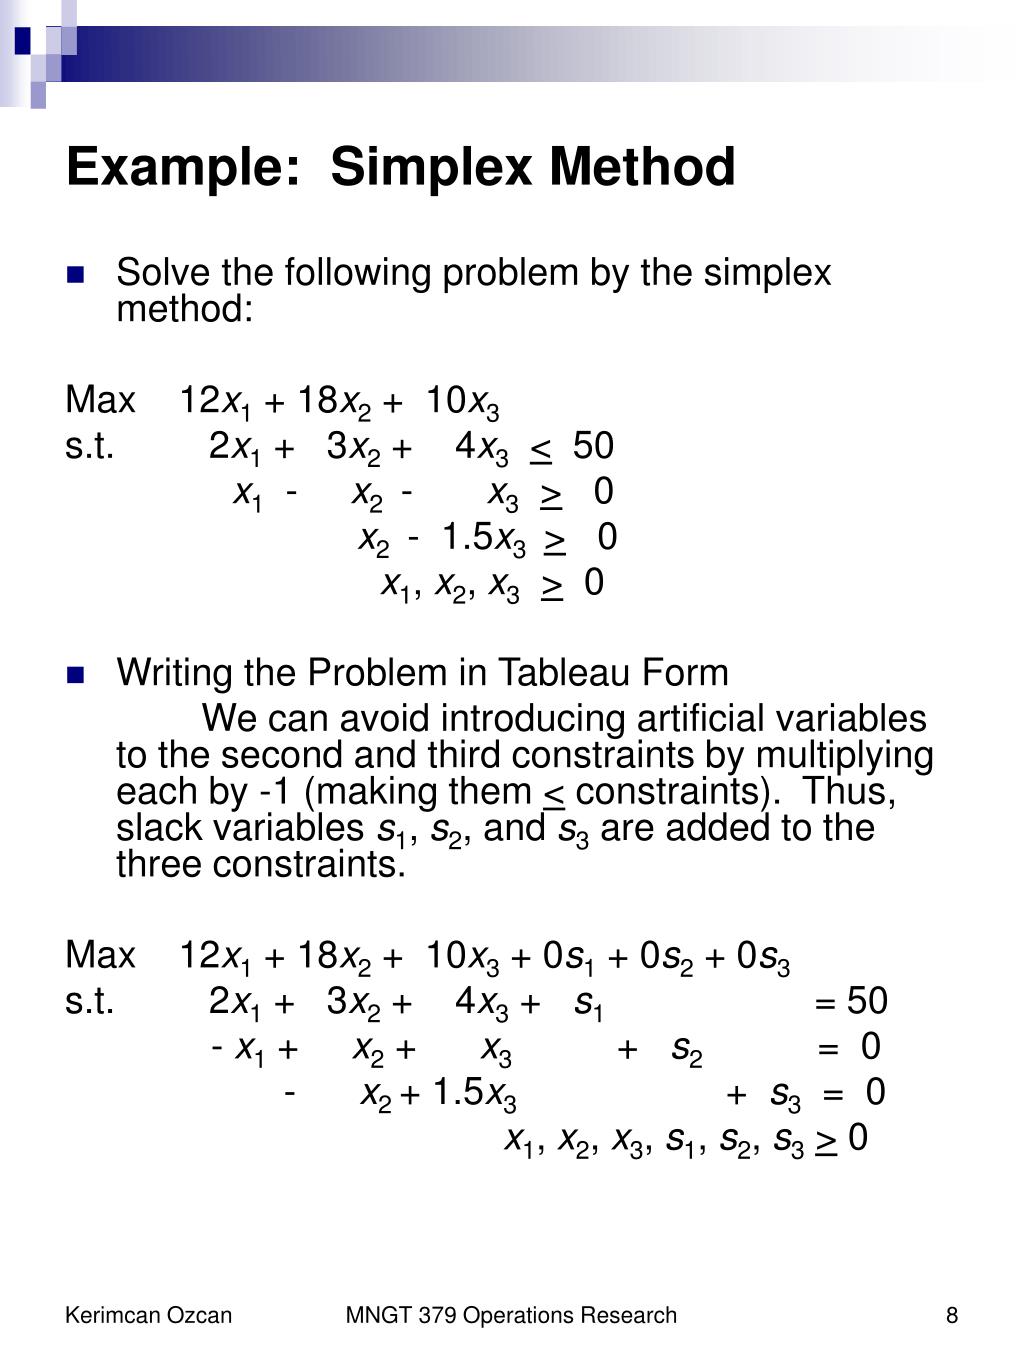 research paper on simplex method